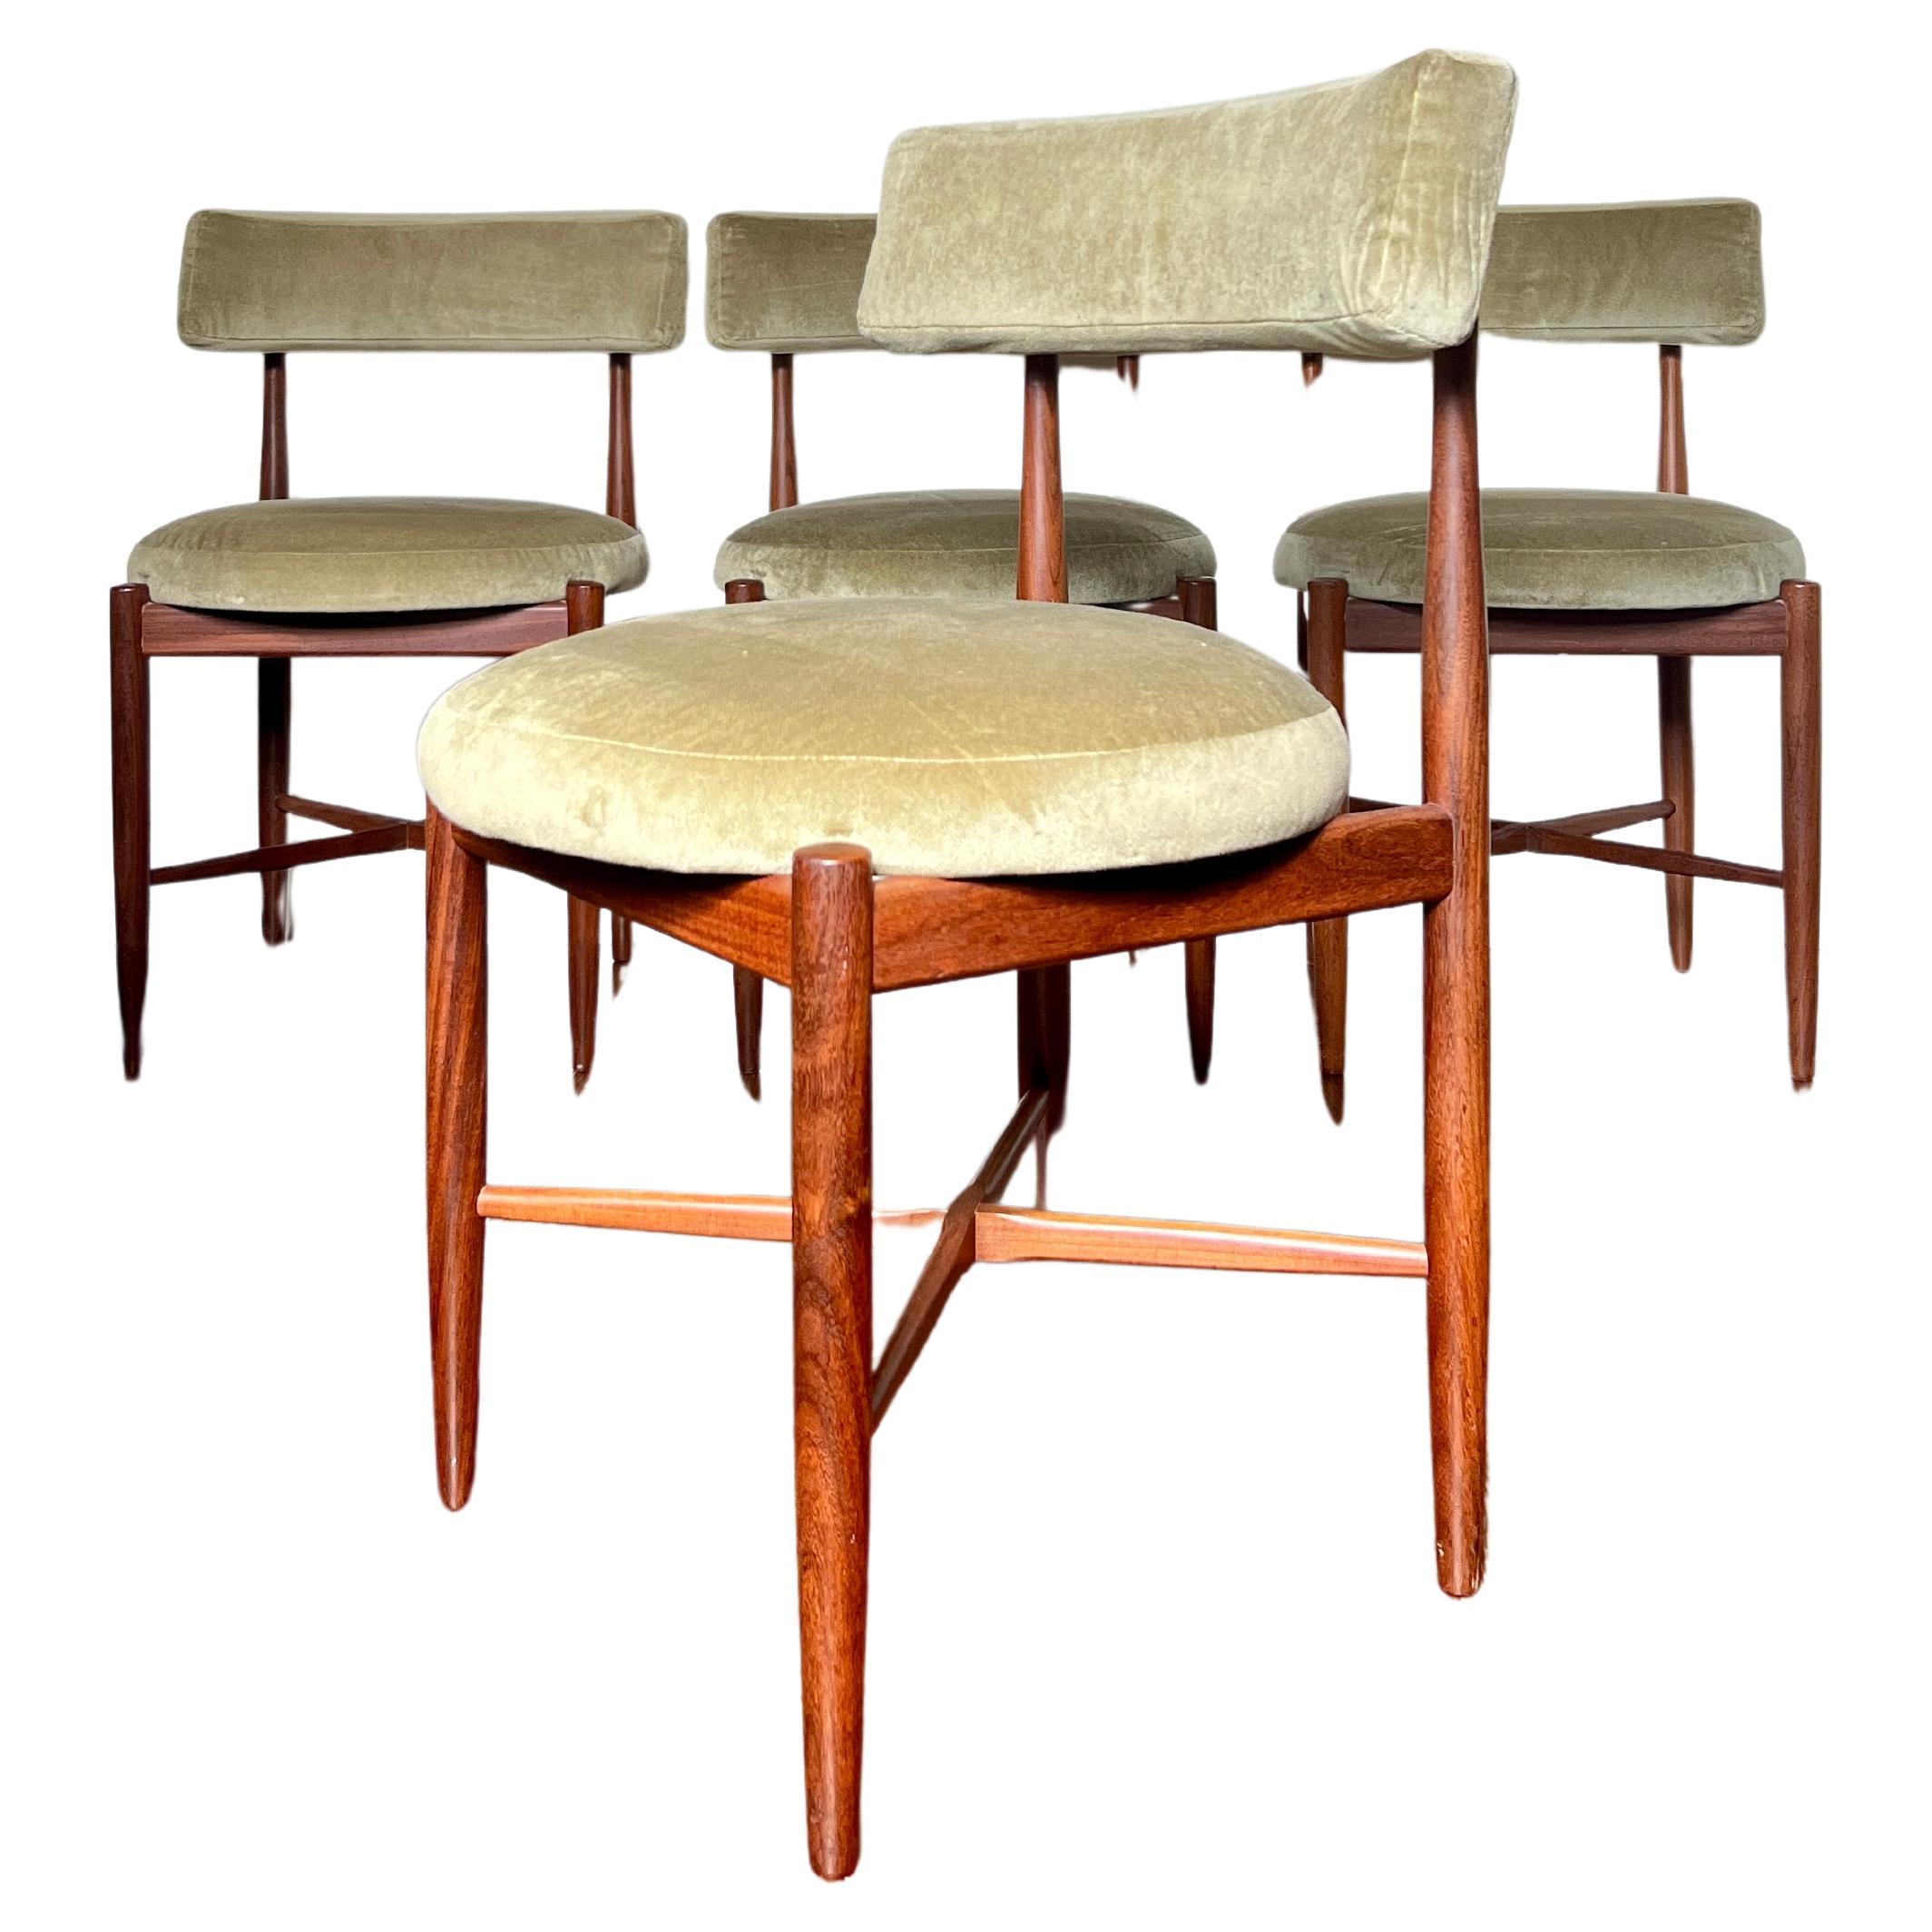 A set of 4 “Fresco” dining chairs in teak by Victor Wilkins for G plan 1960s